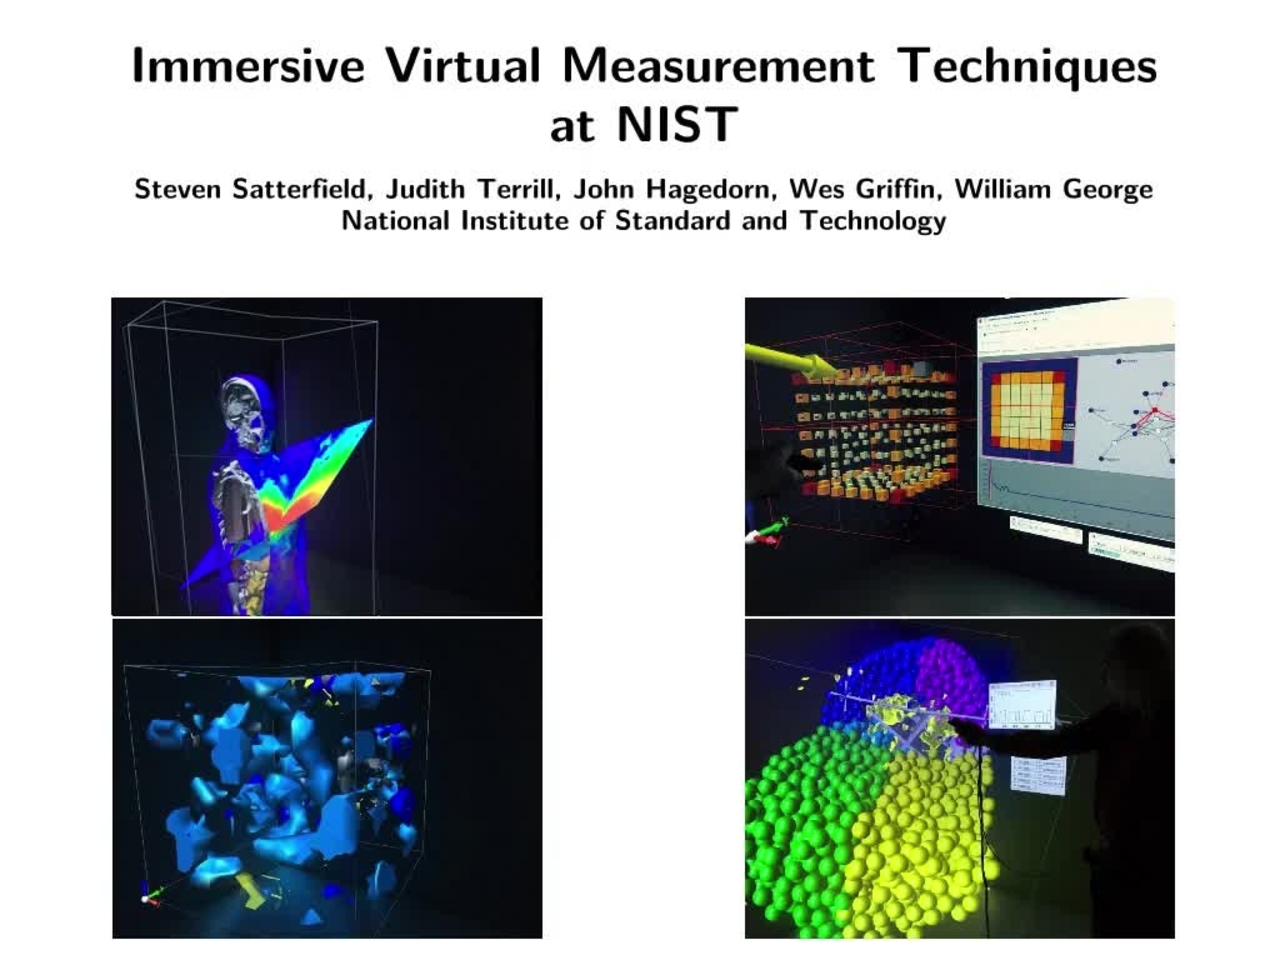 Birds of a Feather Session: Immersive Visualization for Science and Research International, SIGGRAPH 2015 Conference